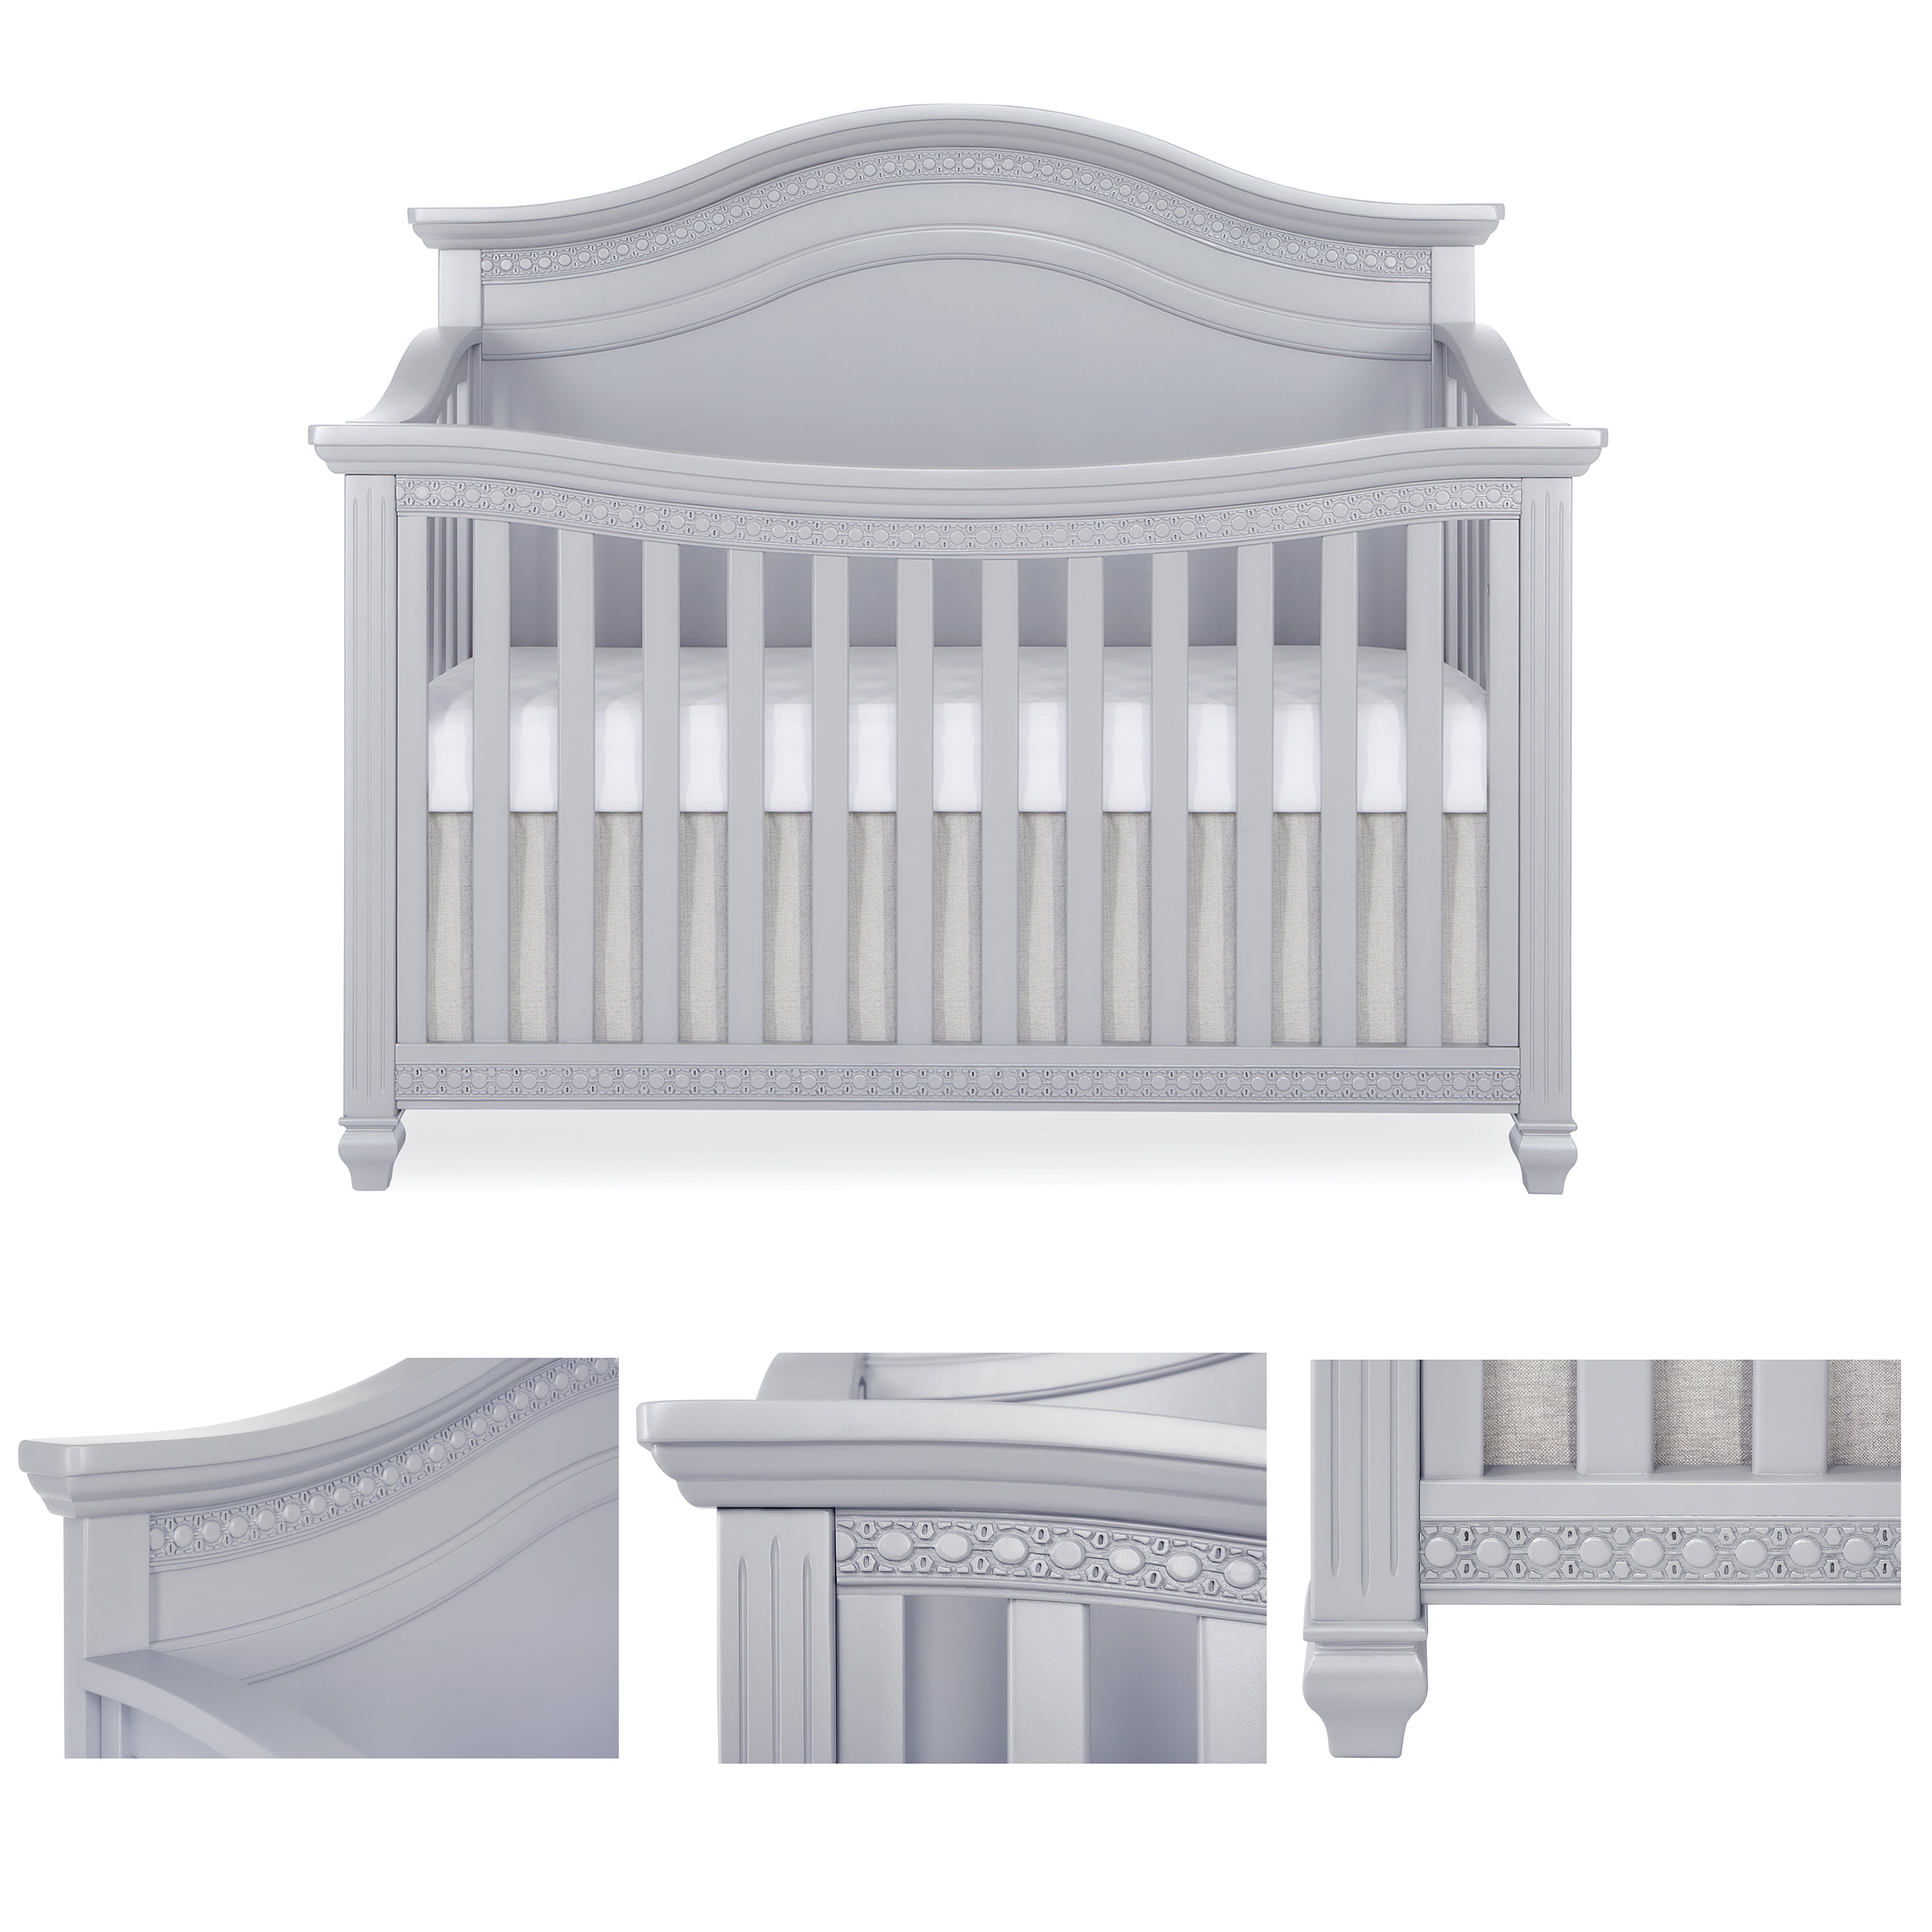 Silver Shimmer Evolur Madison 5 in 1 Curved Top Convertible Crib 